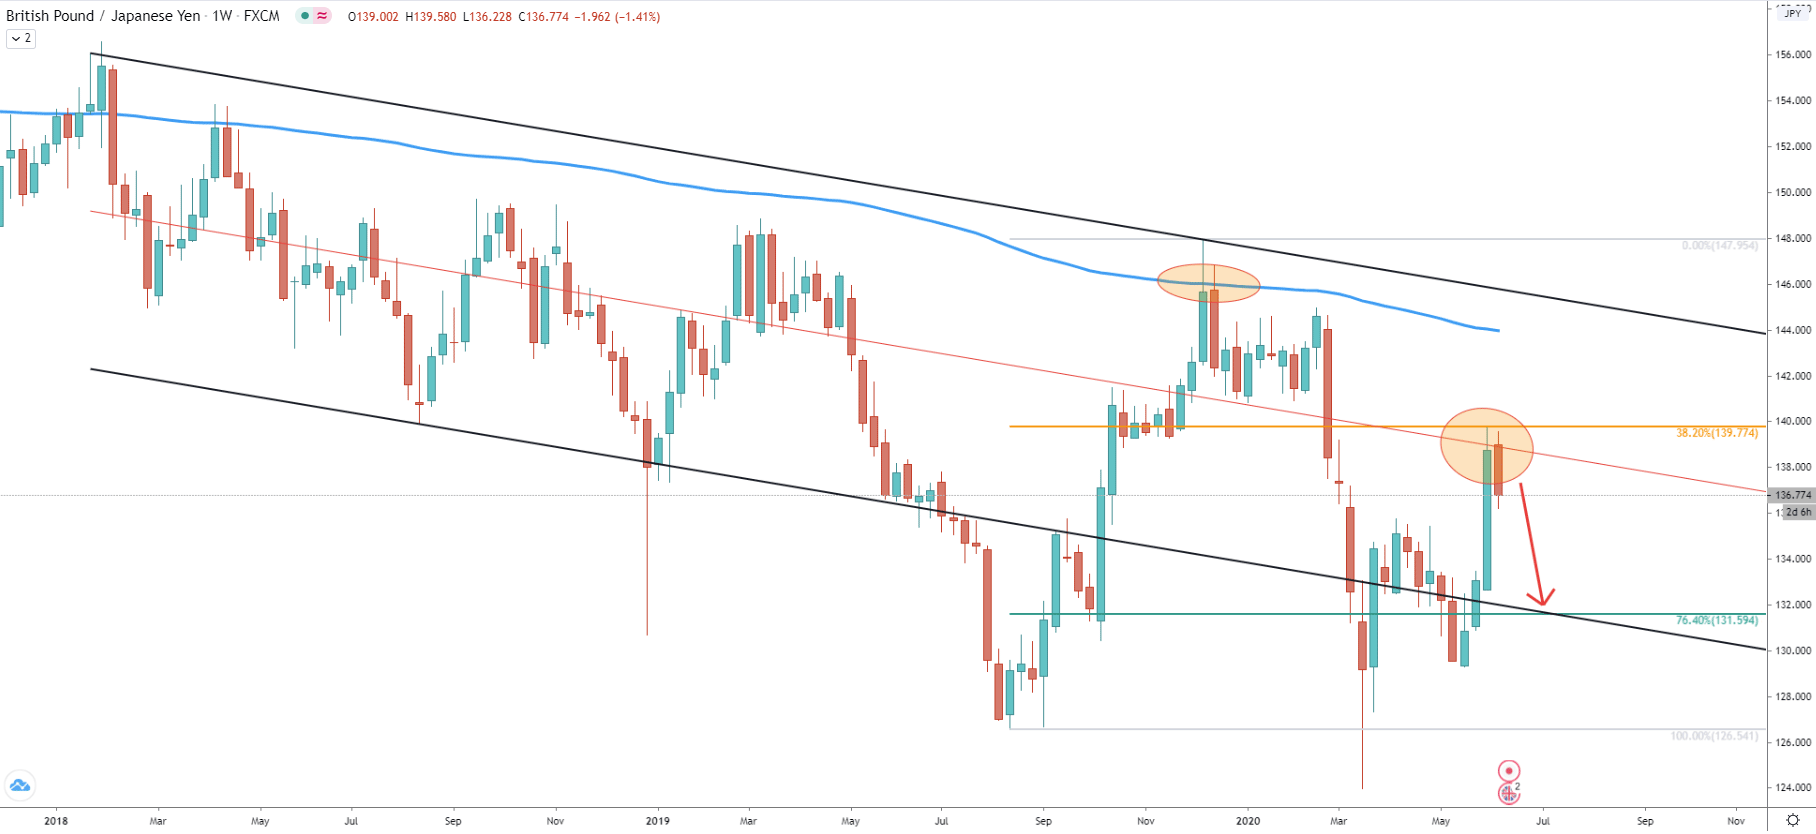 GBP/JPY Weekly Technical Analysis 10 June 2020